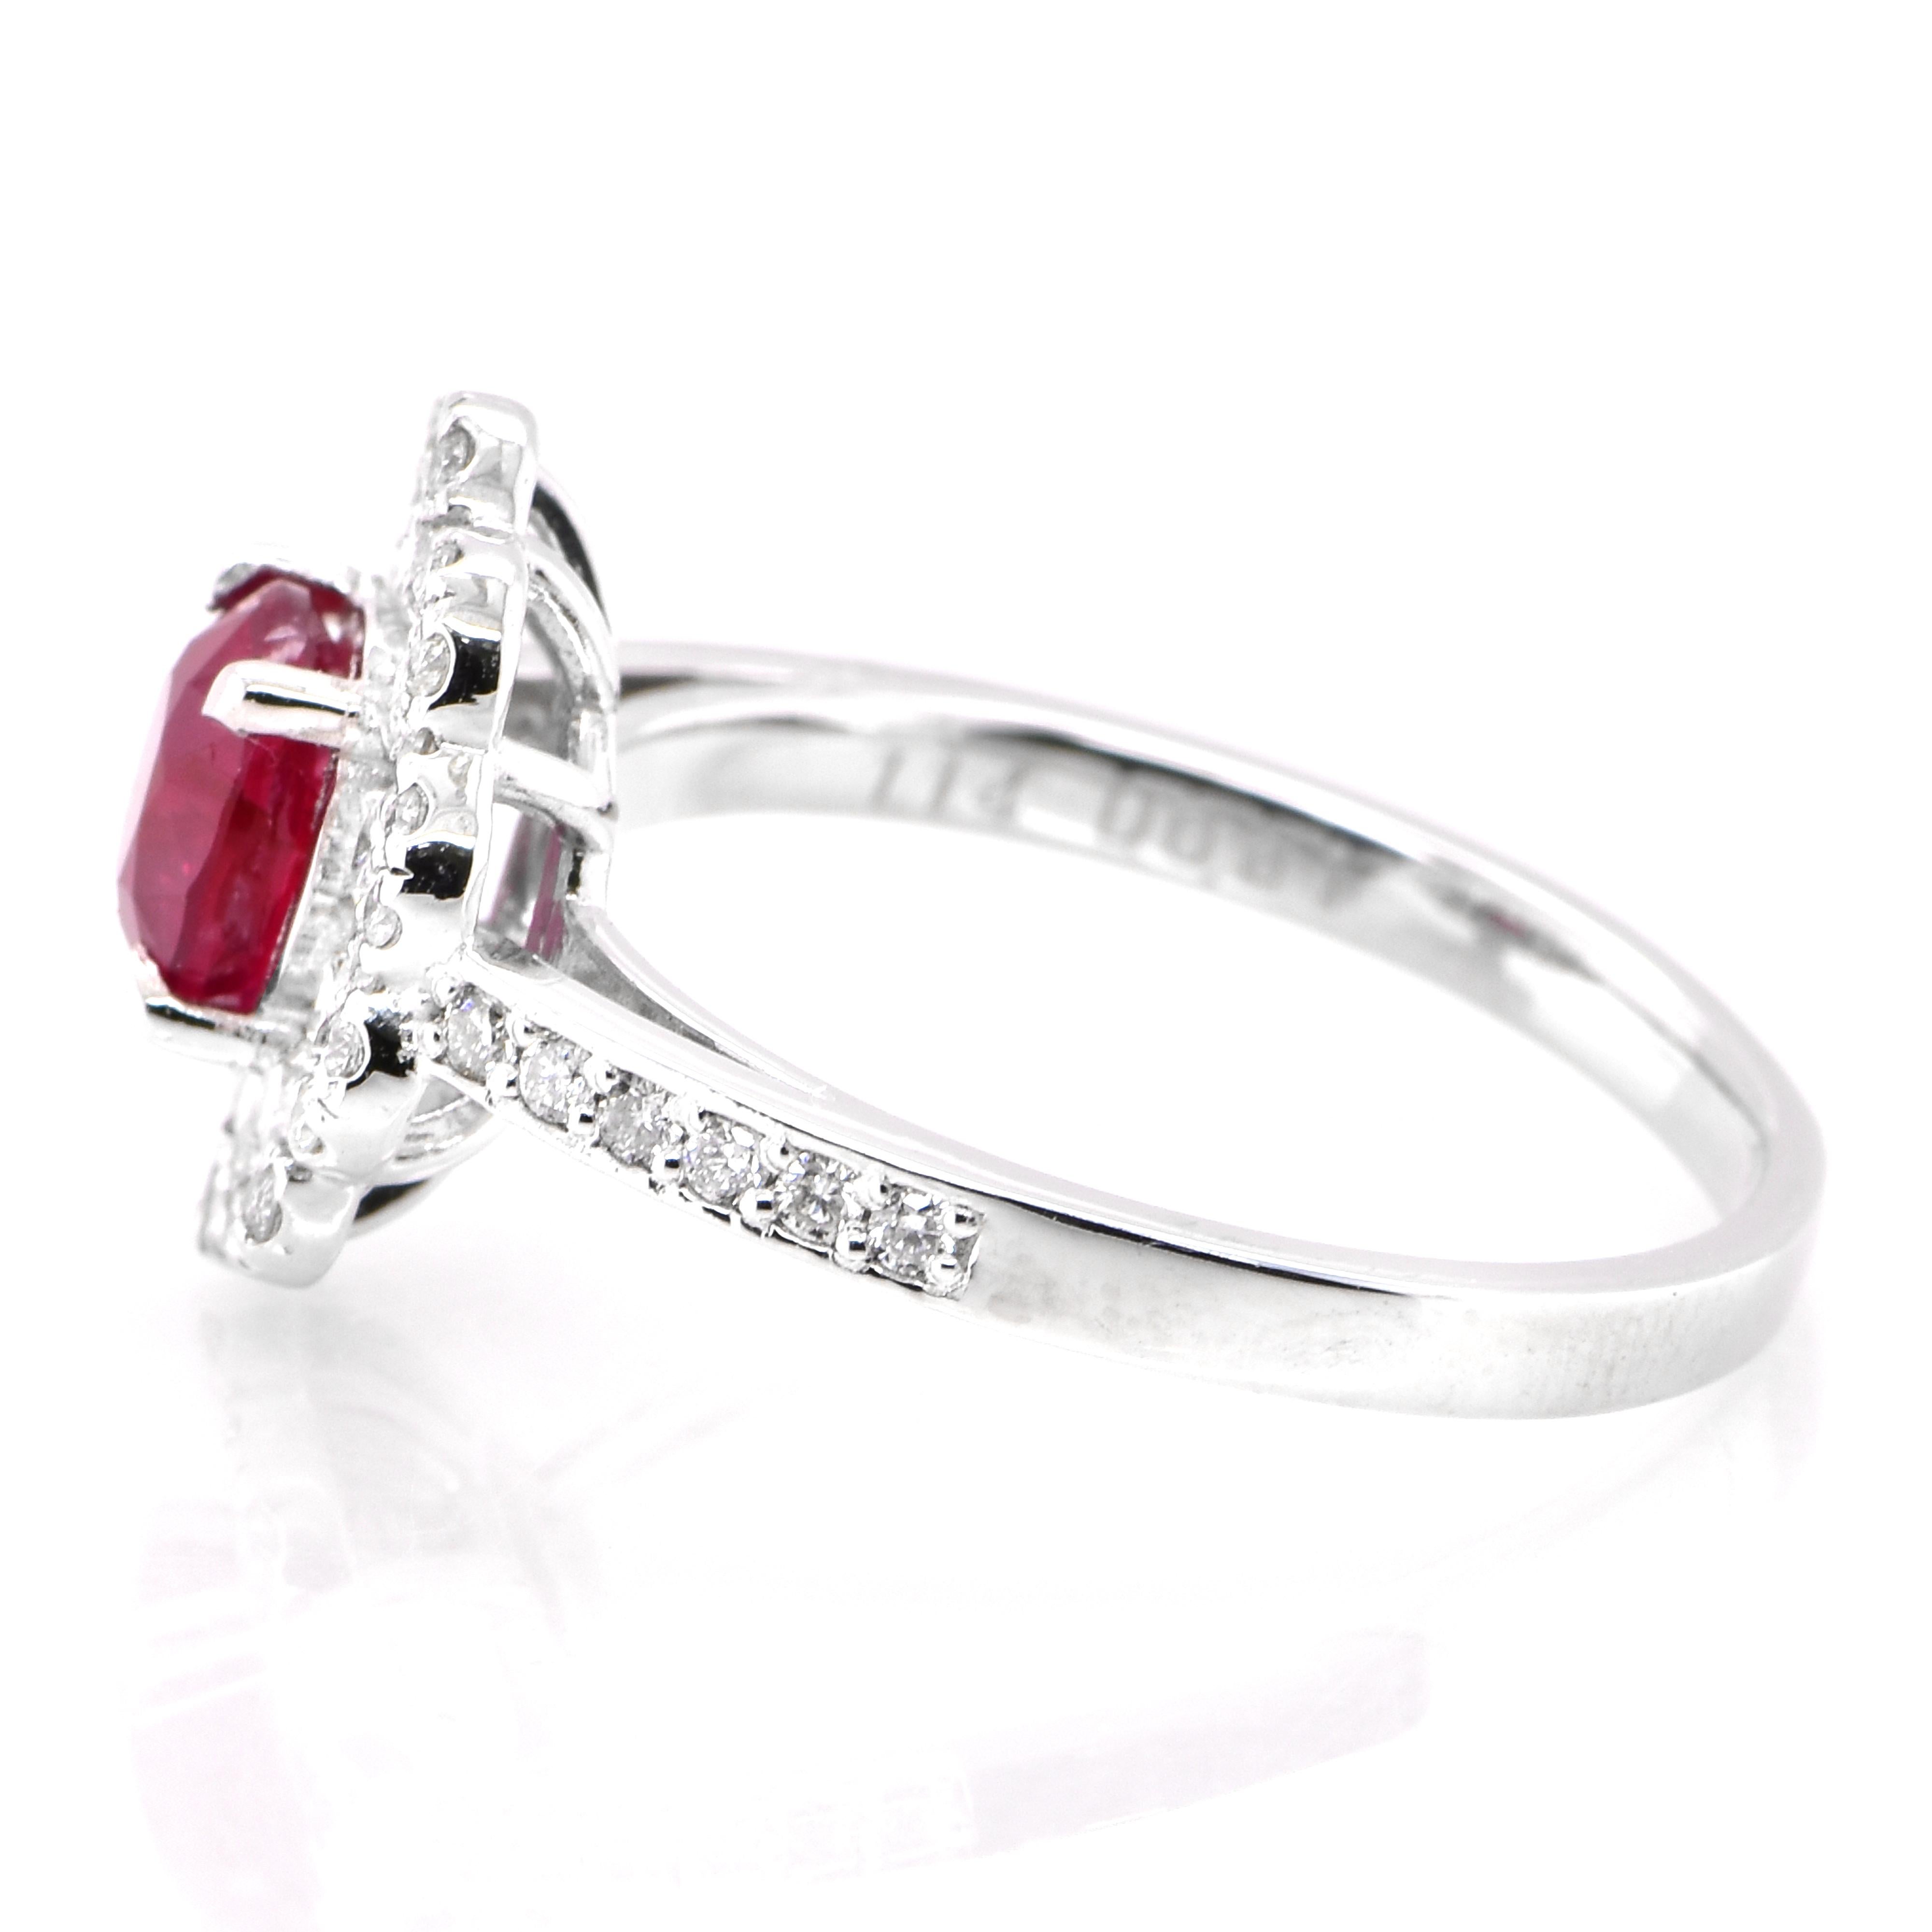 Oval Cut GIA Certified 1.14 Carat Natural, Unheated Ruby and Diamond Ring set in Platinum For Sale